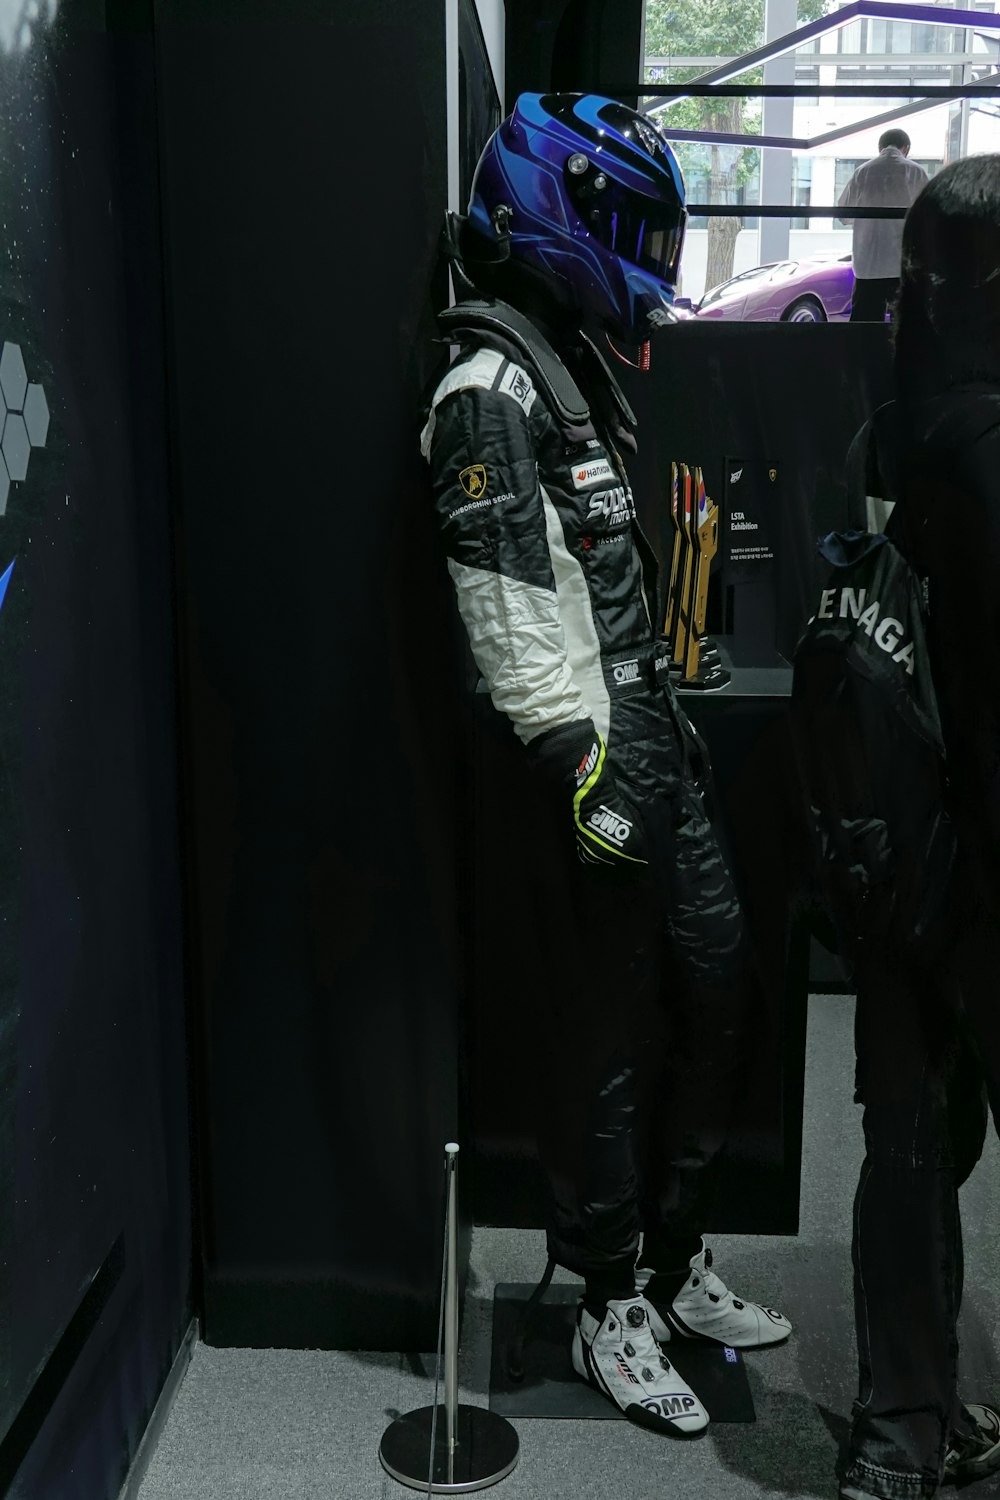 a man in a racing suit standing next to another man